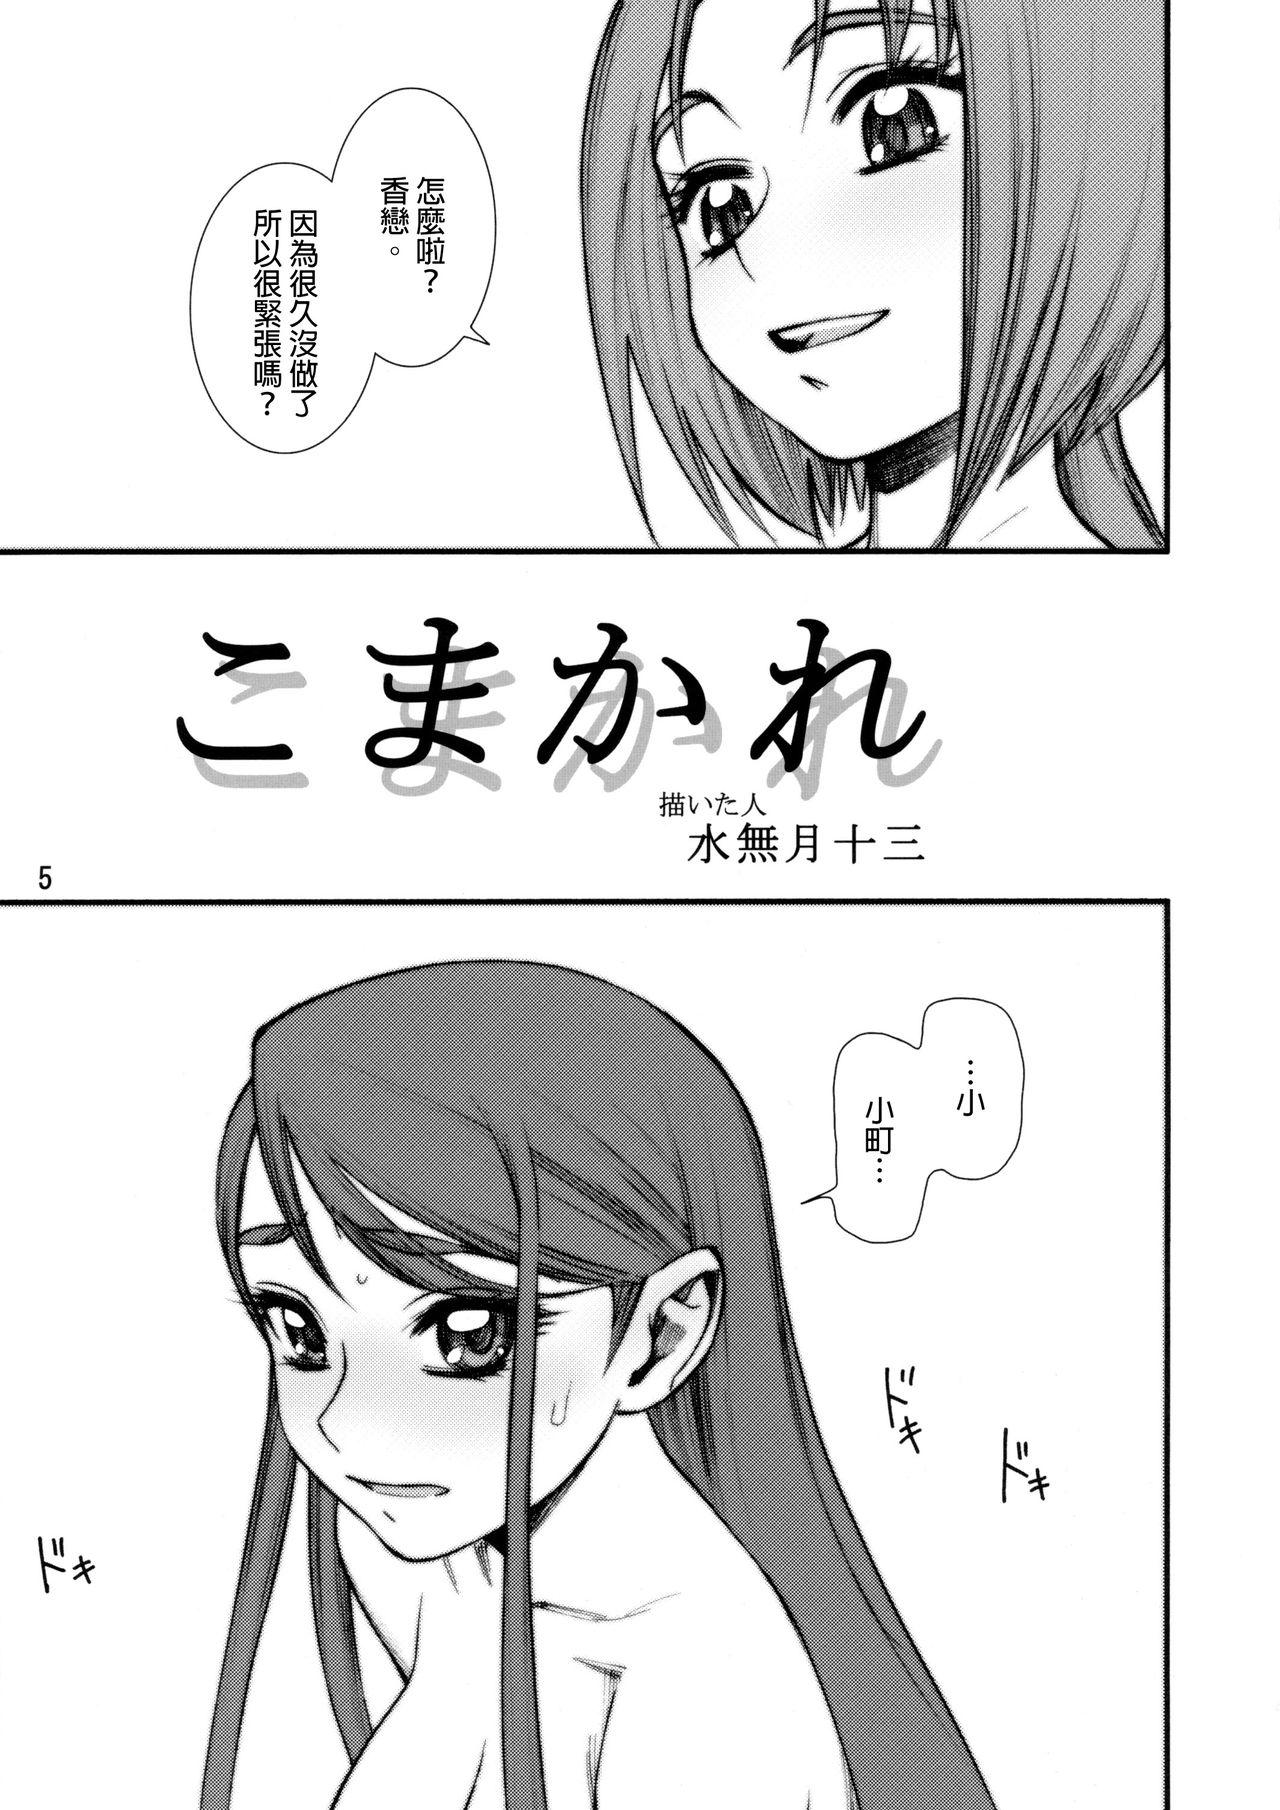 Chichona Koma x Kare - Yes precure 5 Adorable - Page 4